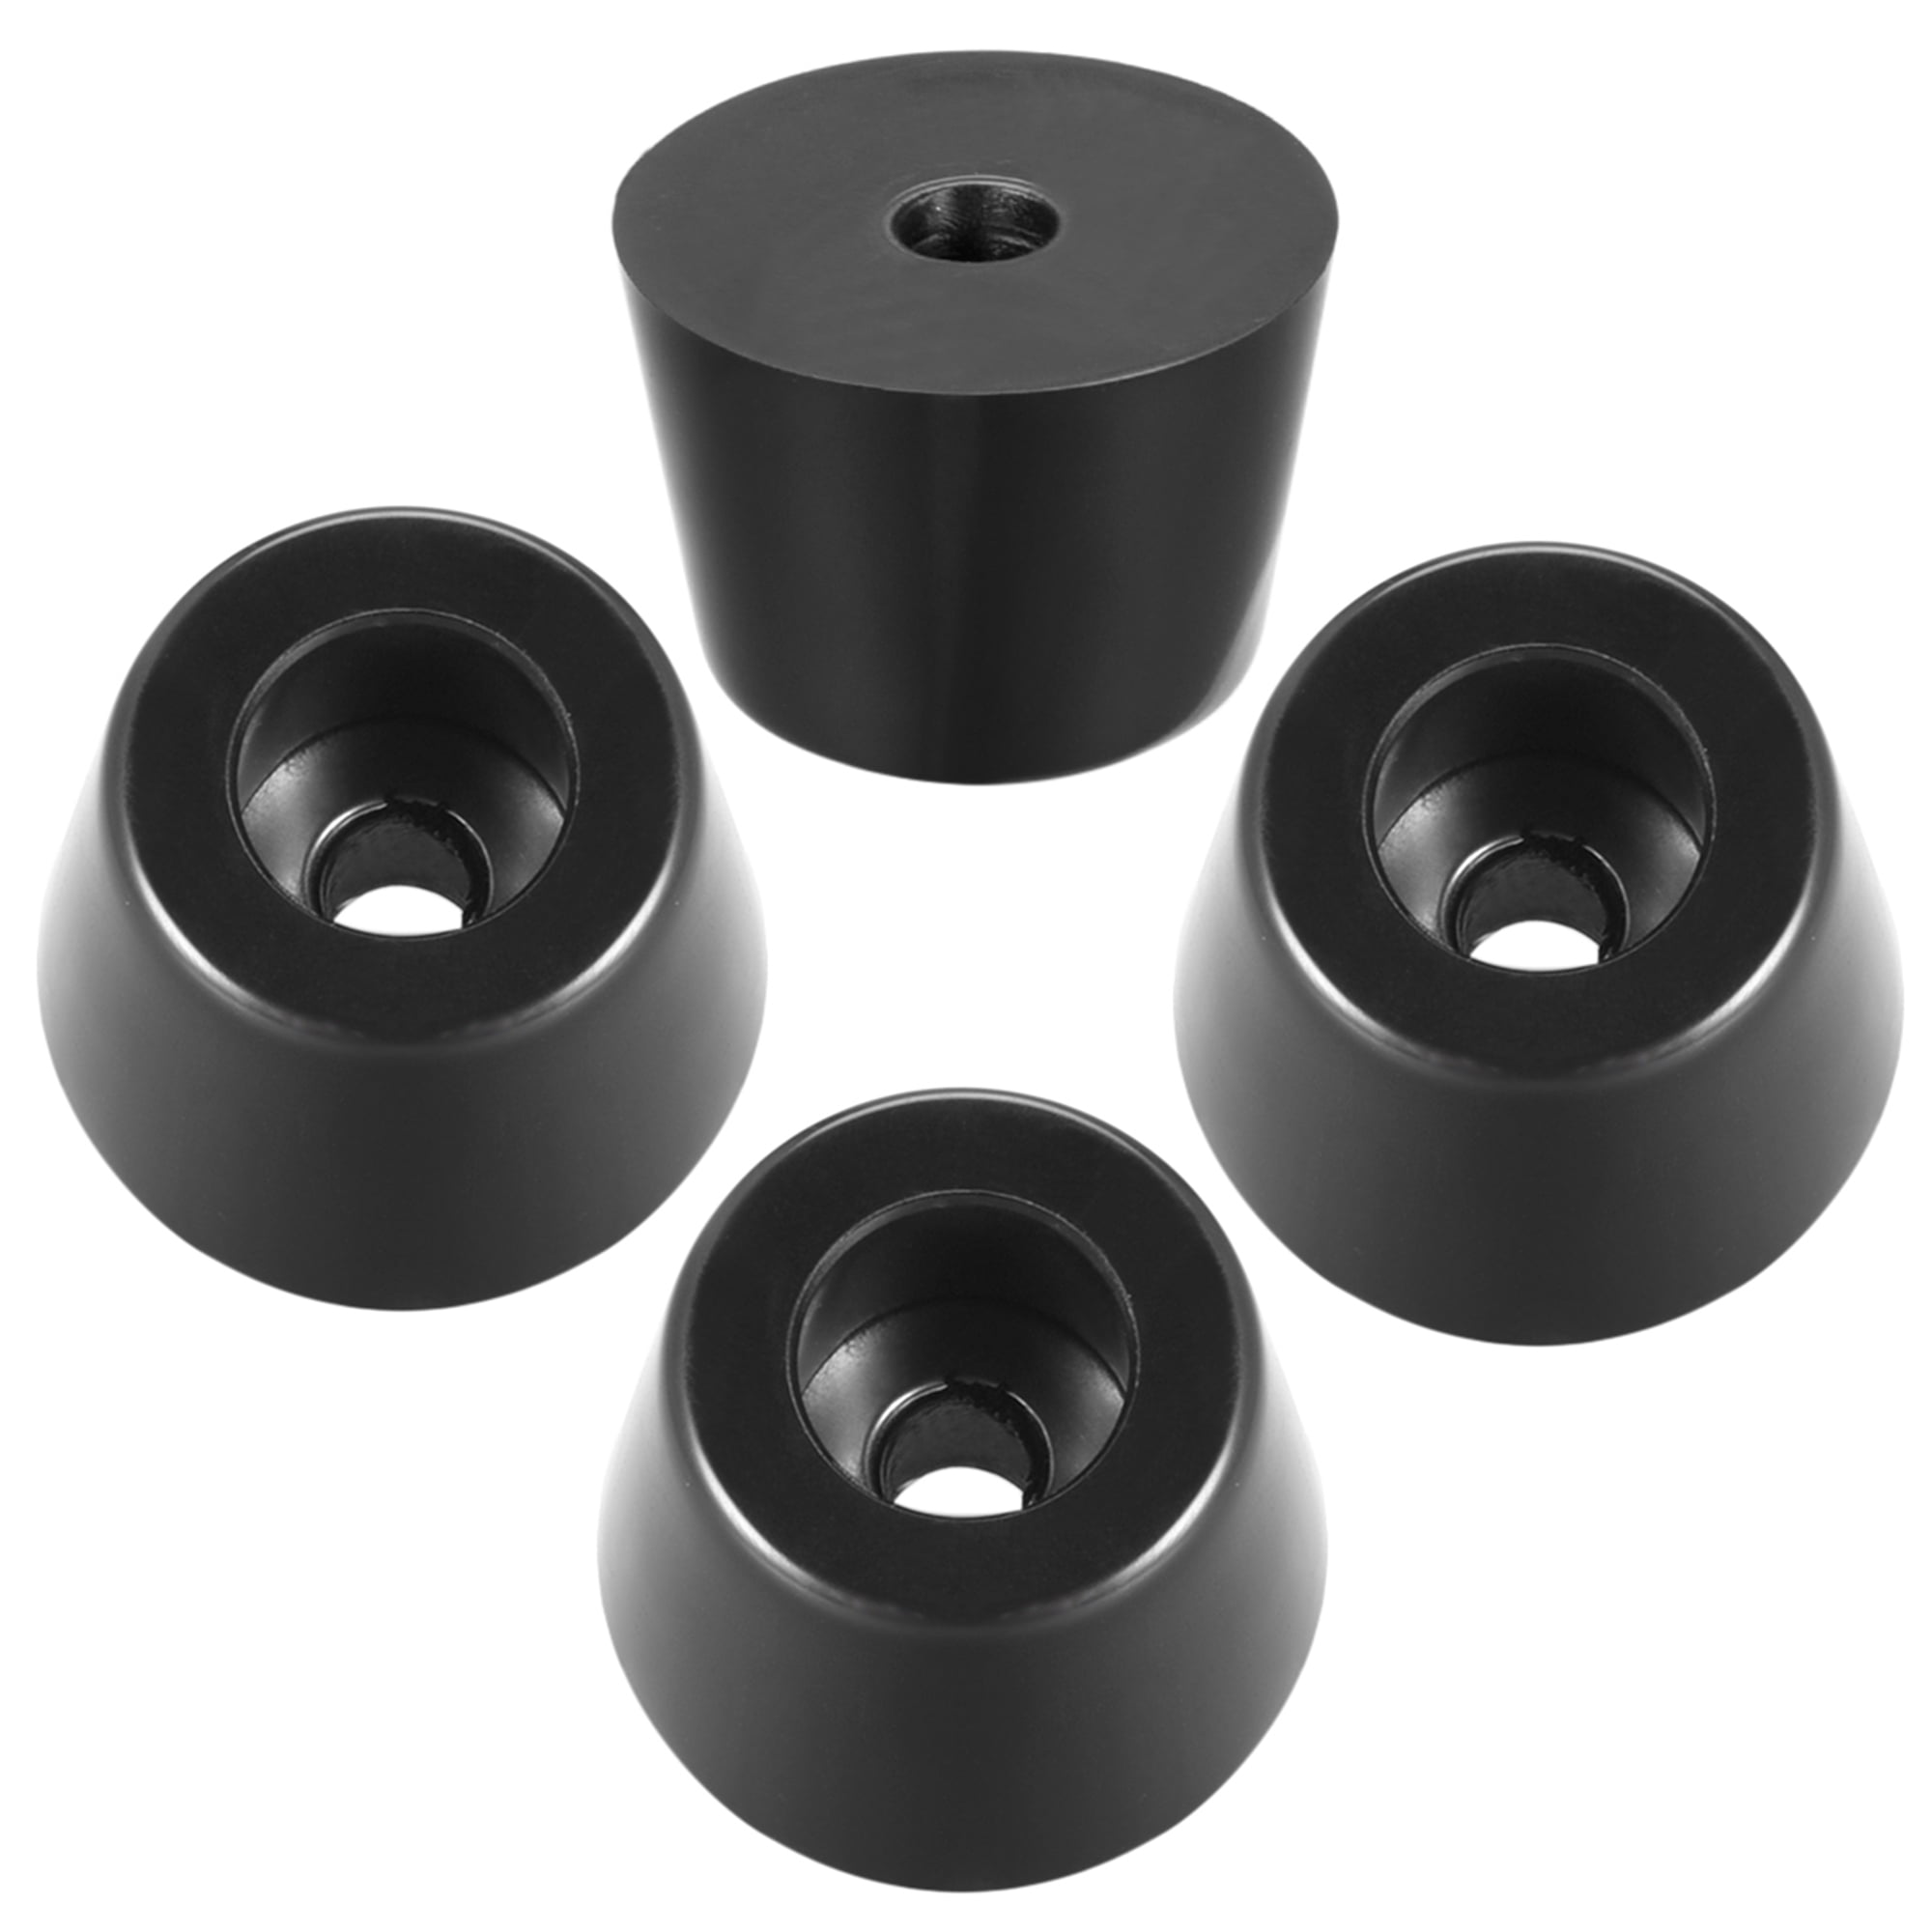 3/4" D x 1/4" H Rubber Tapered Feet Bumper Pads With Recessed Steel Washer. 